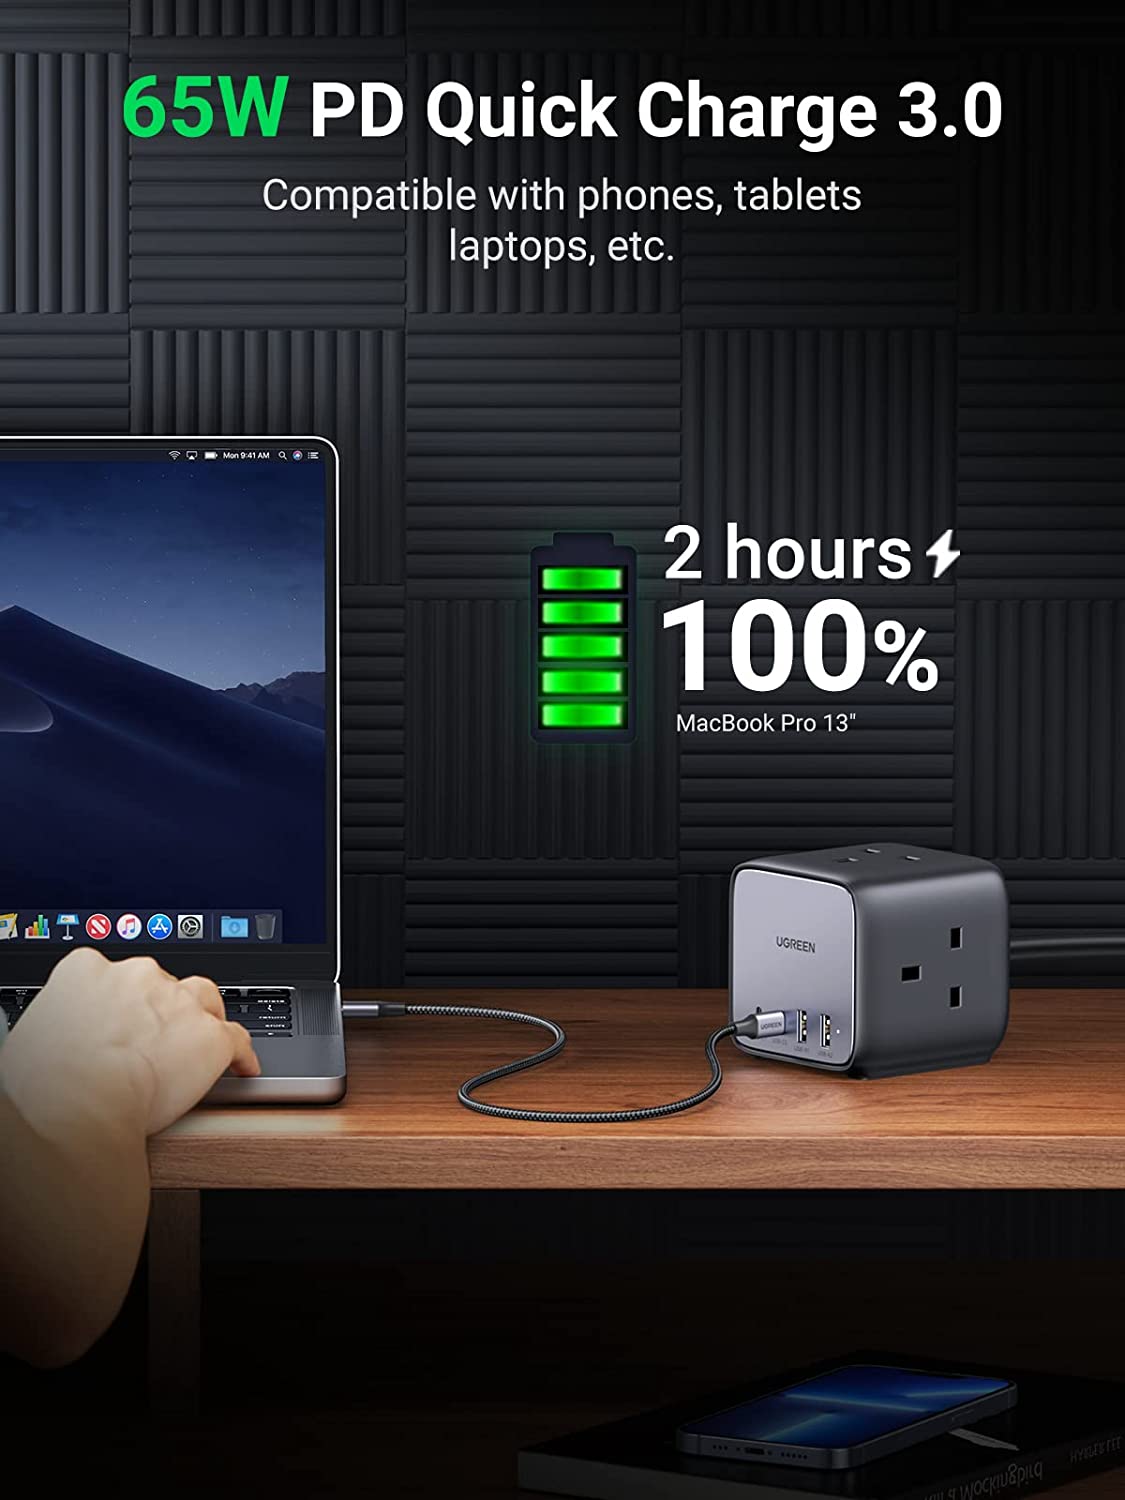 Image shows the DigiNest powering a Macbook Pro 13"